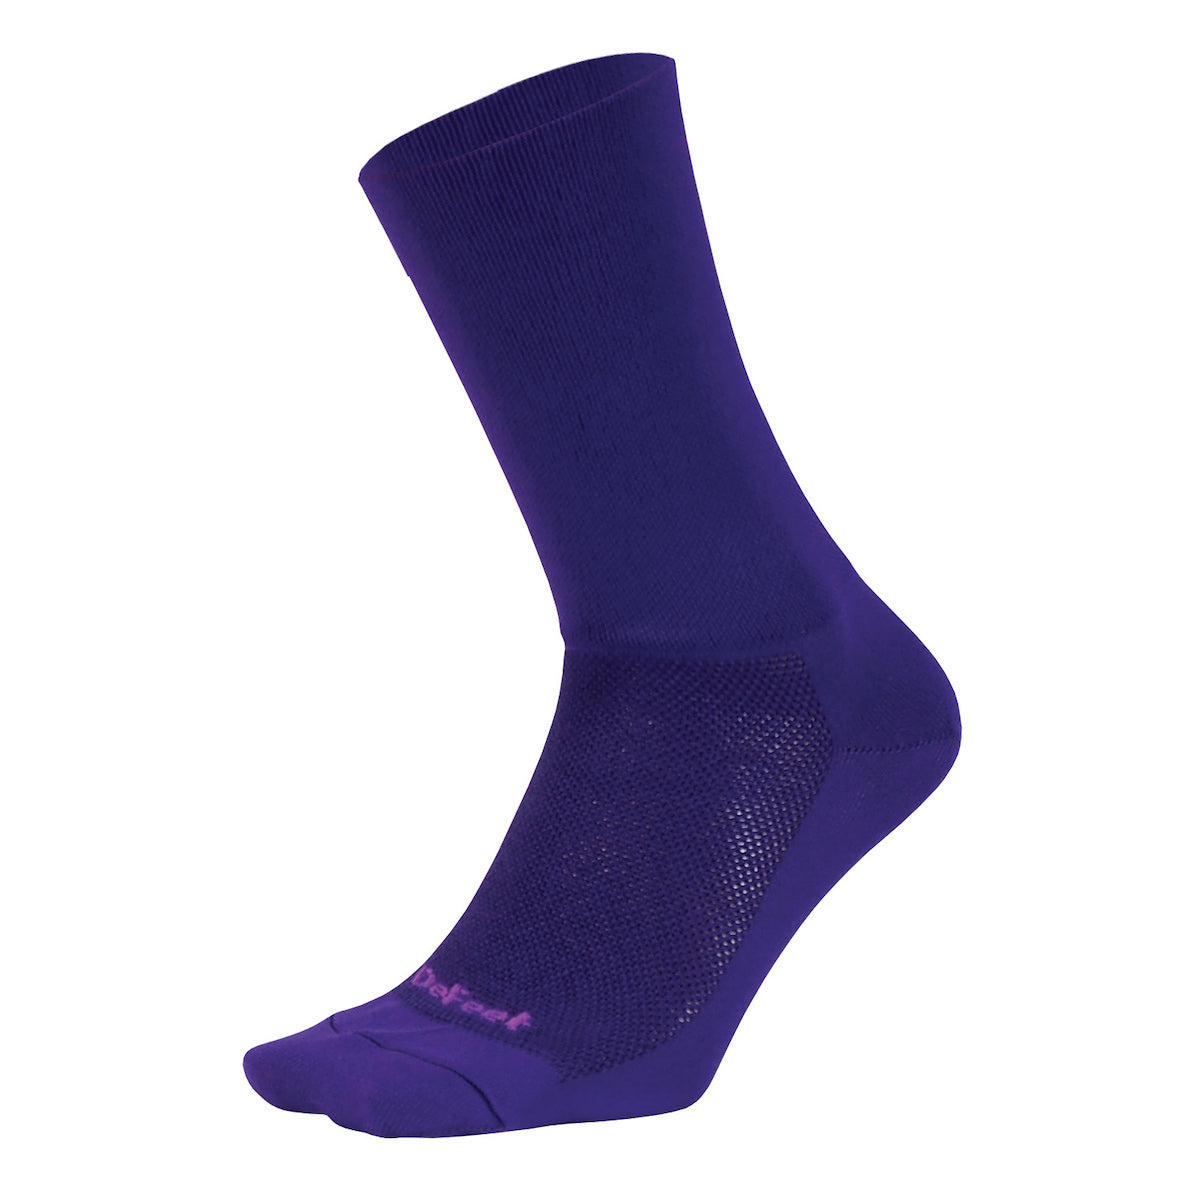 DeFeet Aireator 6" D-Logo cycling sock with 6" double cuff in purple